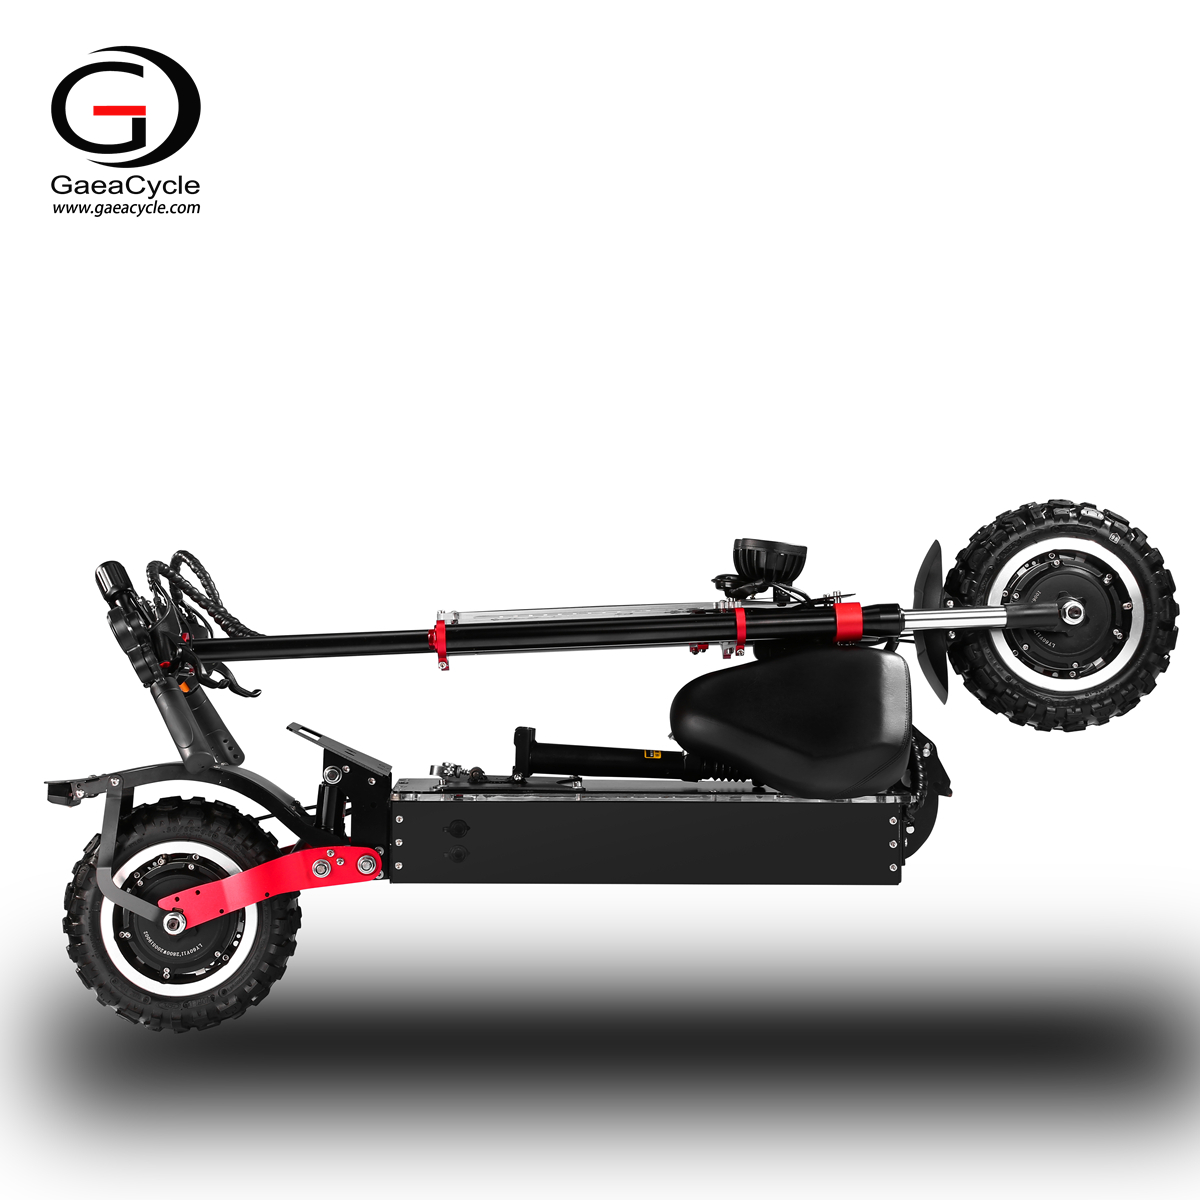 Gaea S4 Folding Electric Scooter 6000W Dual Motor, 13" Road Tires, Max Load 400kg, 60v43ah with Seat for Adult